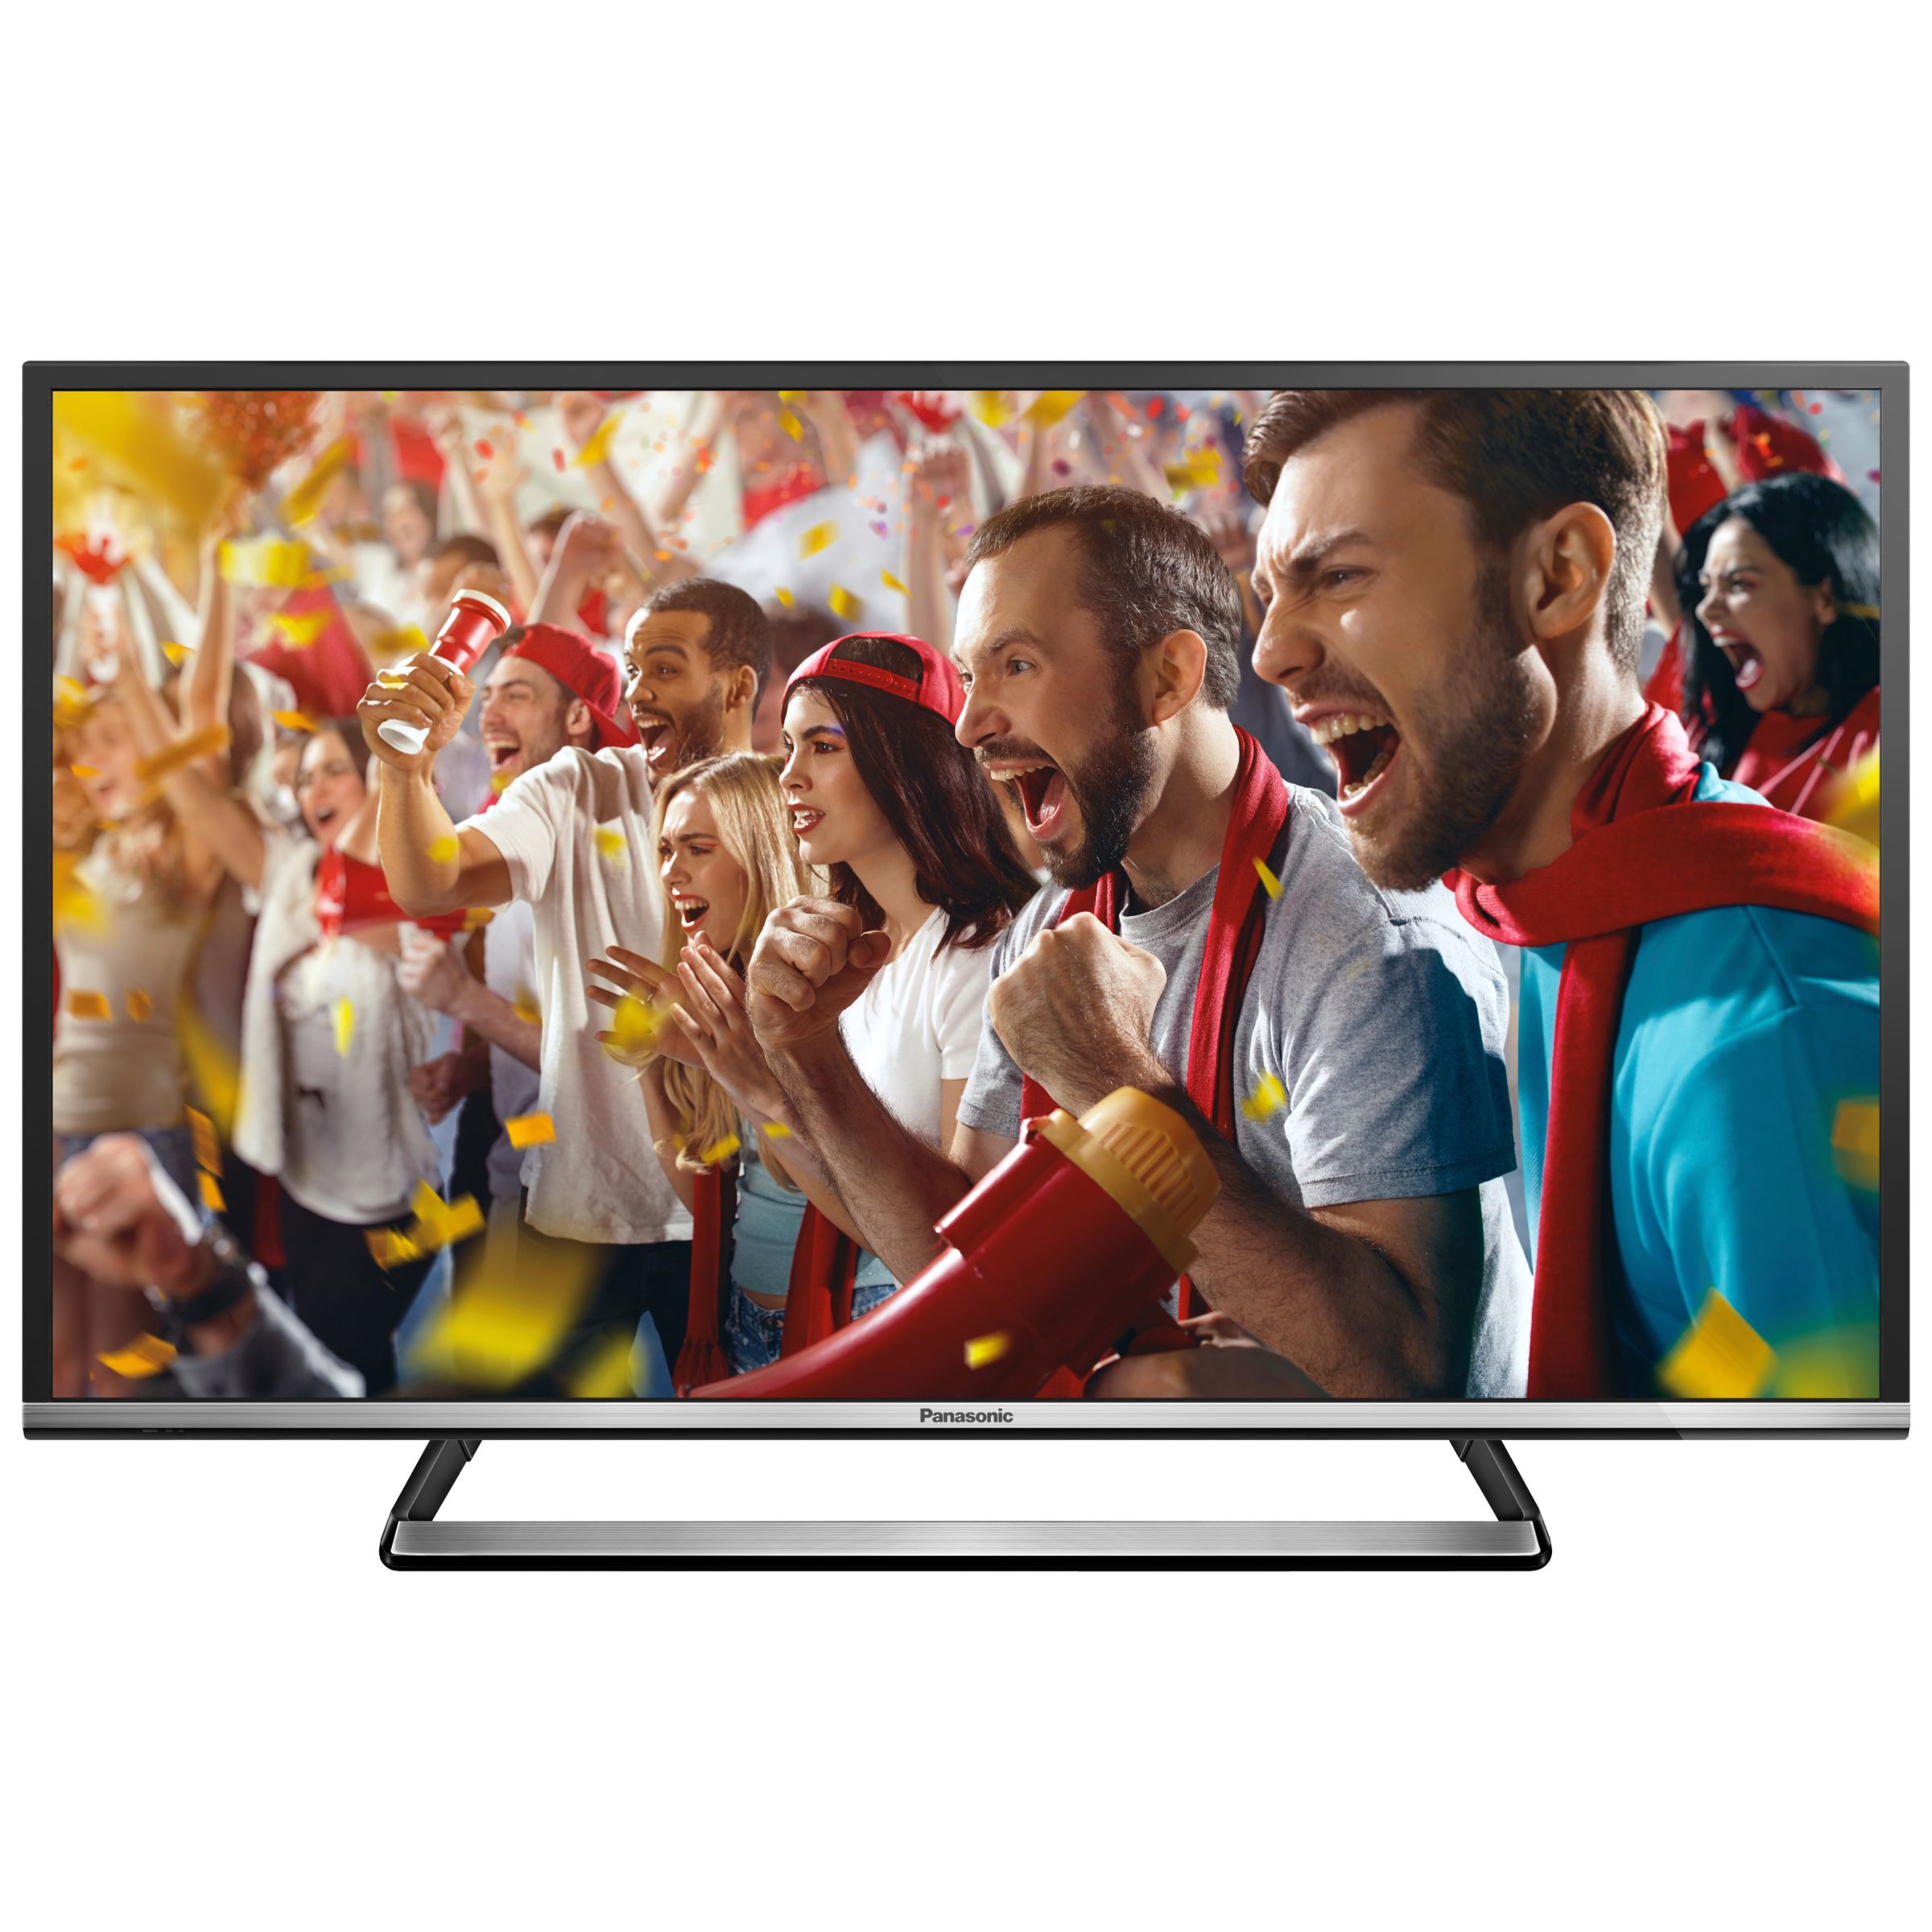 Panasonic Viera TX-40CS520B LED HD 1080p Smart TV, 40" with Freeview HD and Built-In Wi-Fi